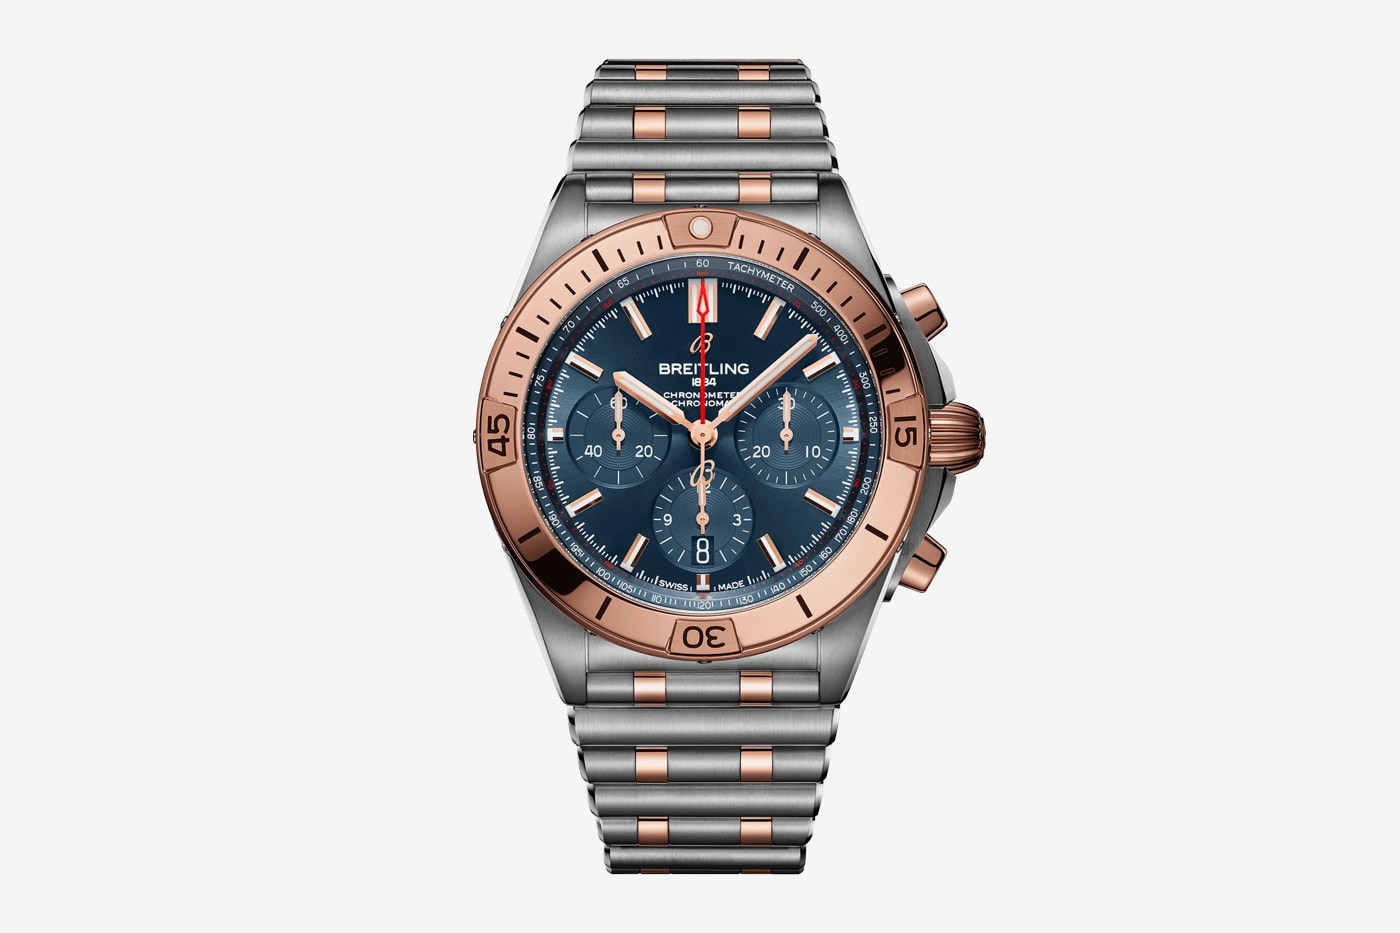 breitling chronomat 2020 watch refresh info sports watch stainless steel Rouleaux bracelet 42mm case signature rider tabs rotating bezel Caliber 01 movement two-tone finishes Bentley edition